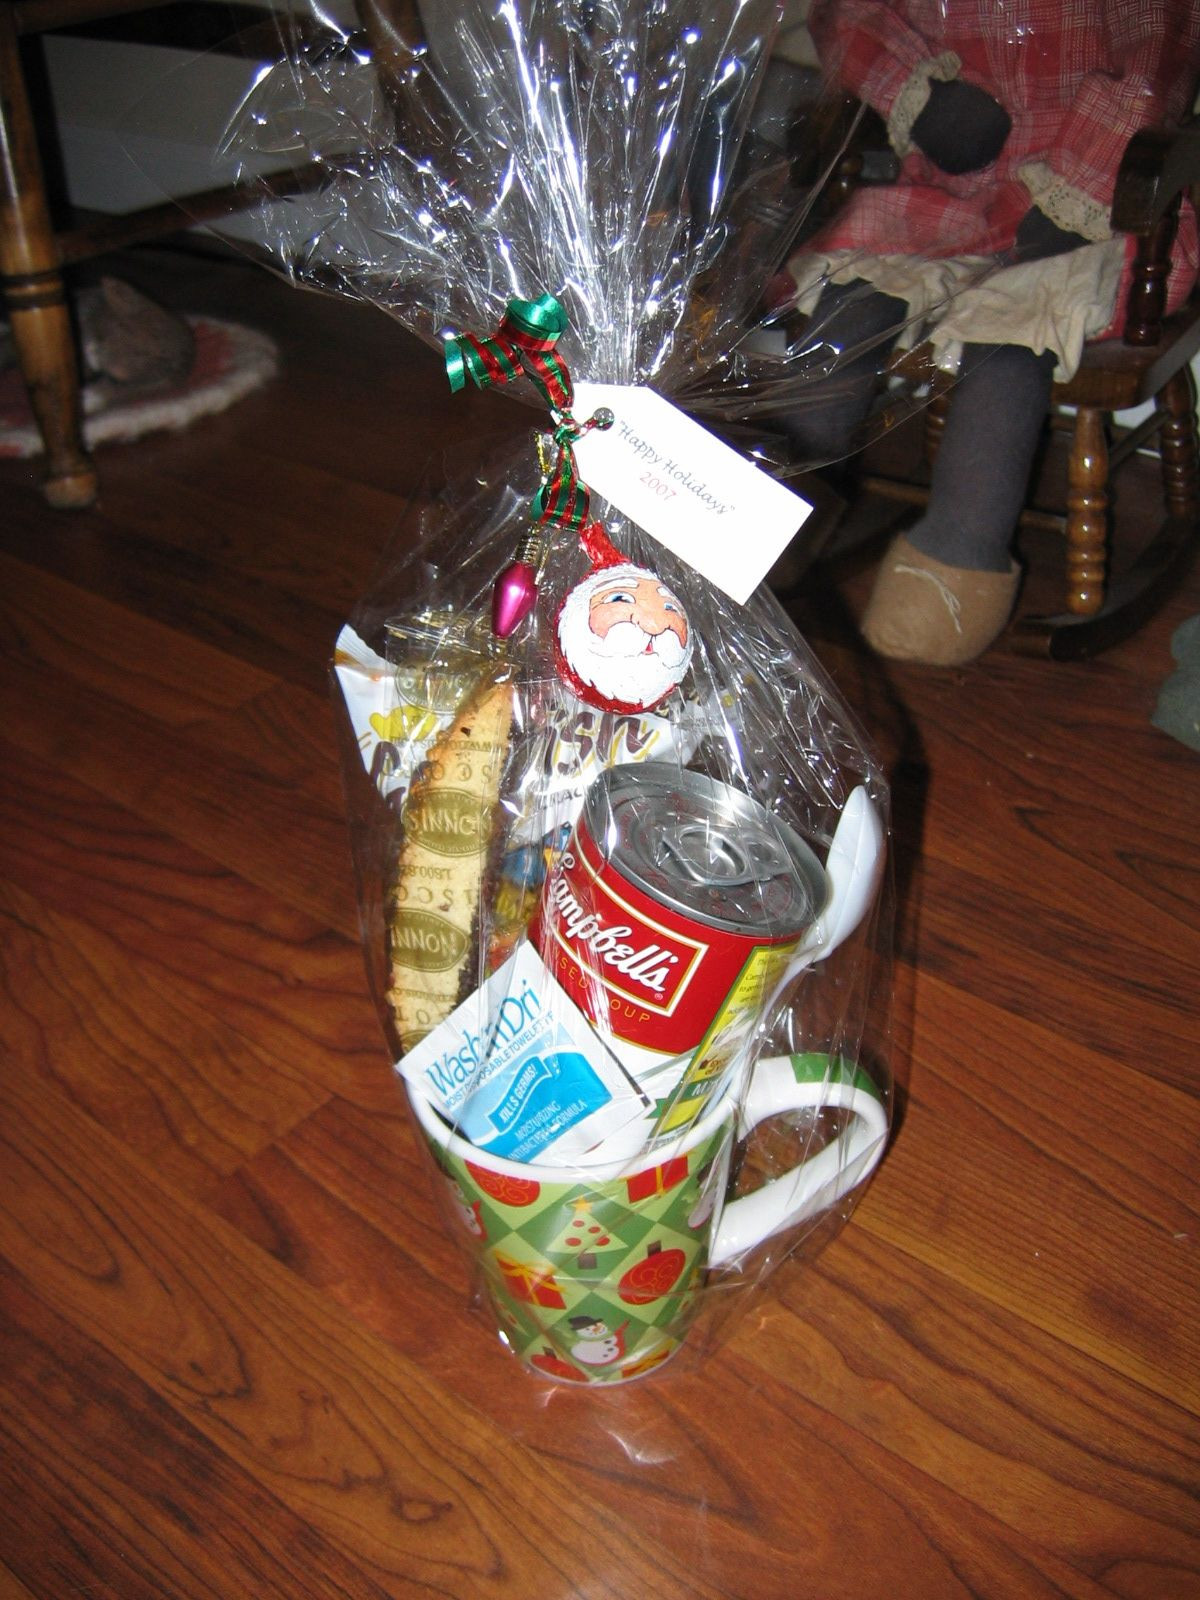 Soup Gift Basket Ideas
 "Lunch in a Cup" Gift Basket can of soup goldfish